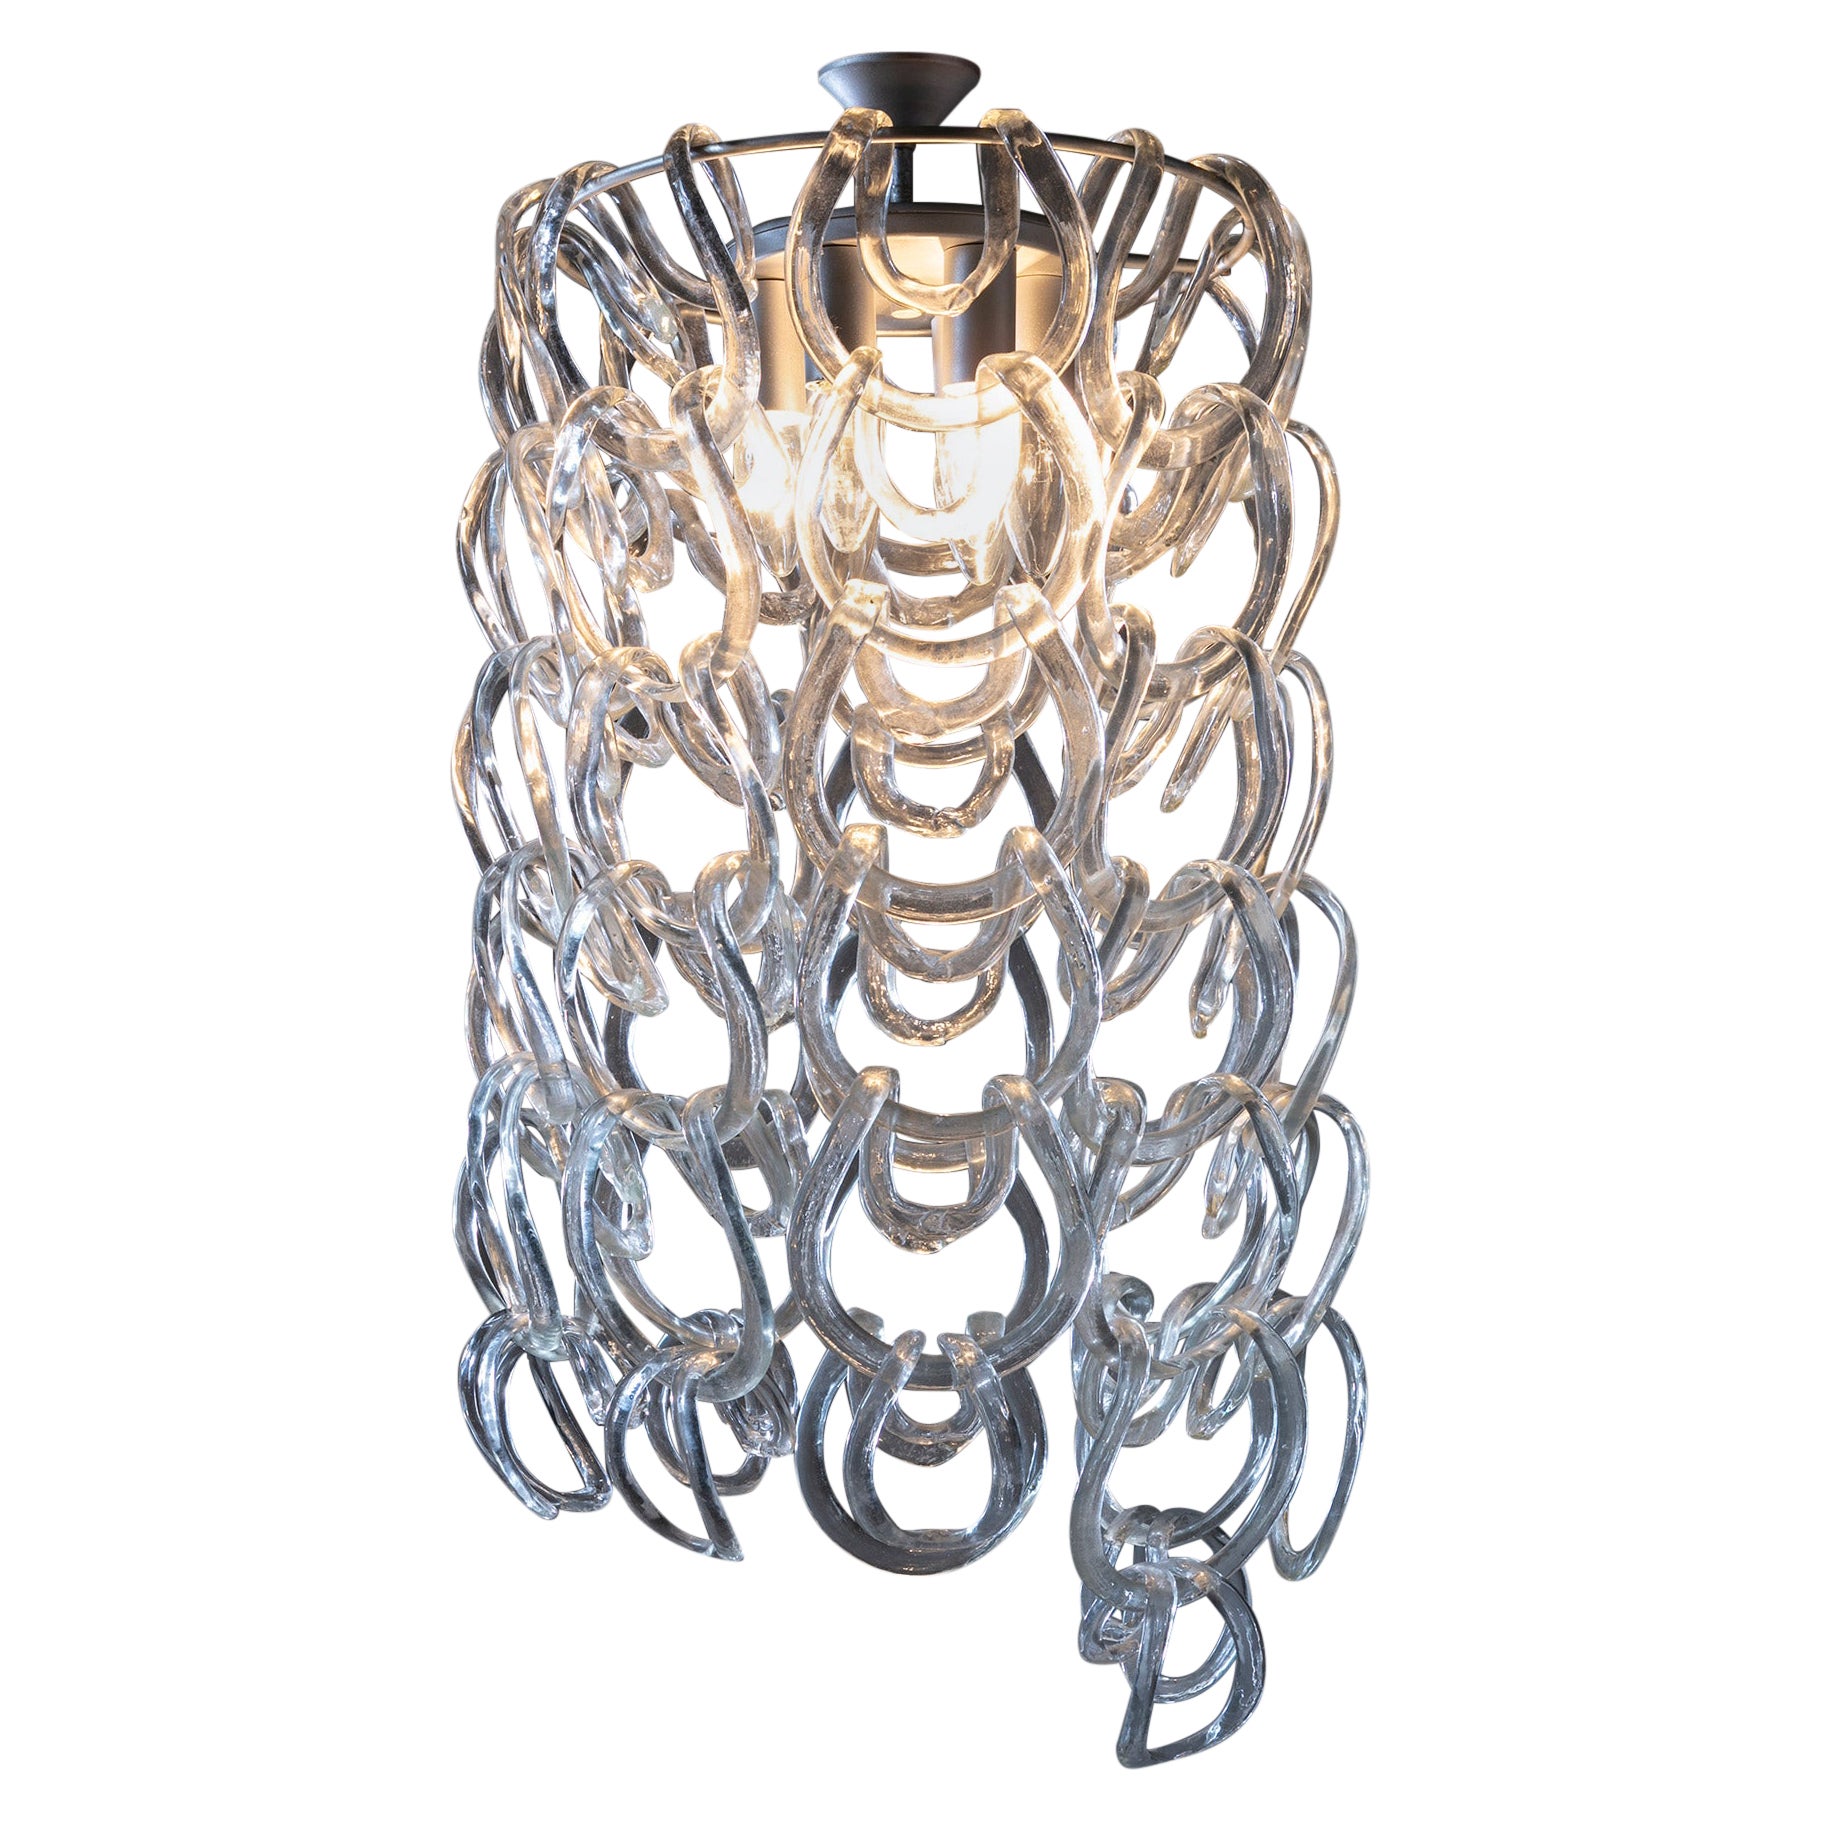 "Giogali" Murano Glass Chandelier by Angelo Mangiarotti for Vistosi, Italy, 1967 For Sale